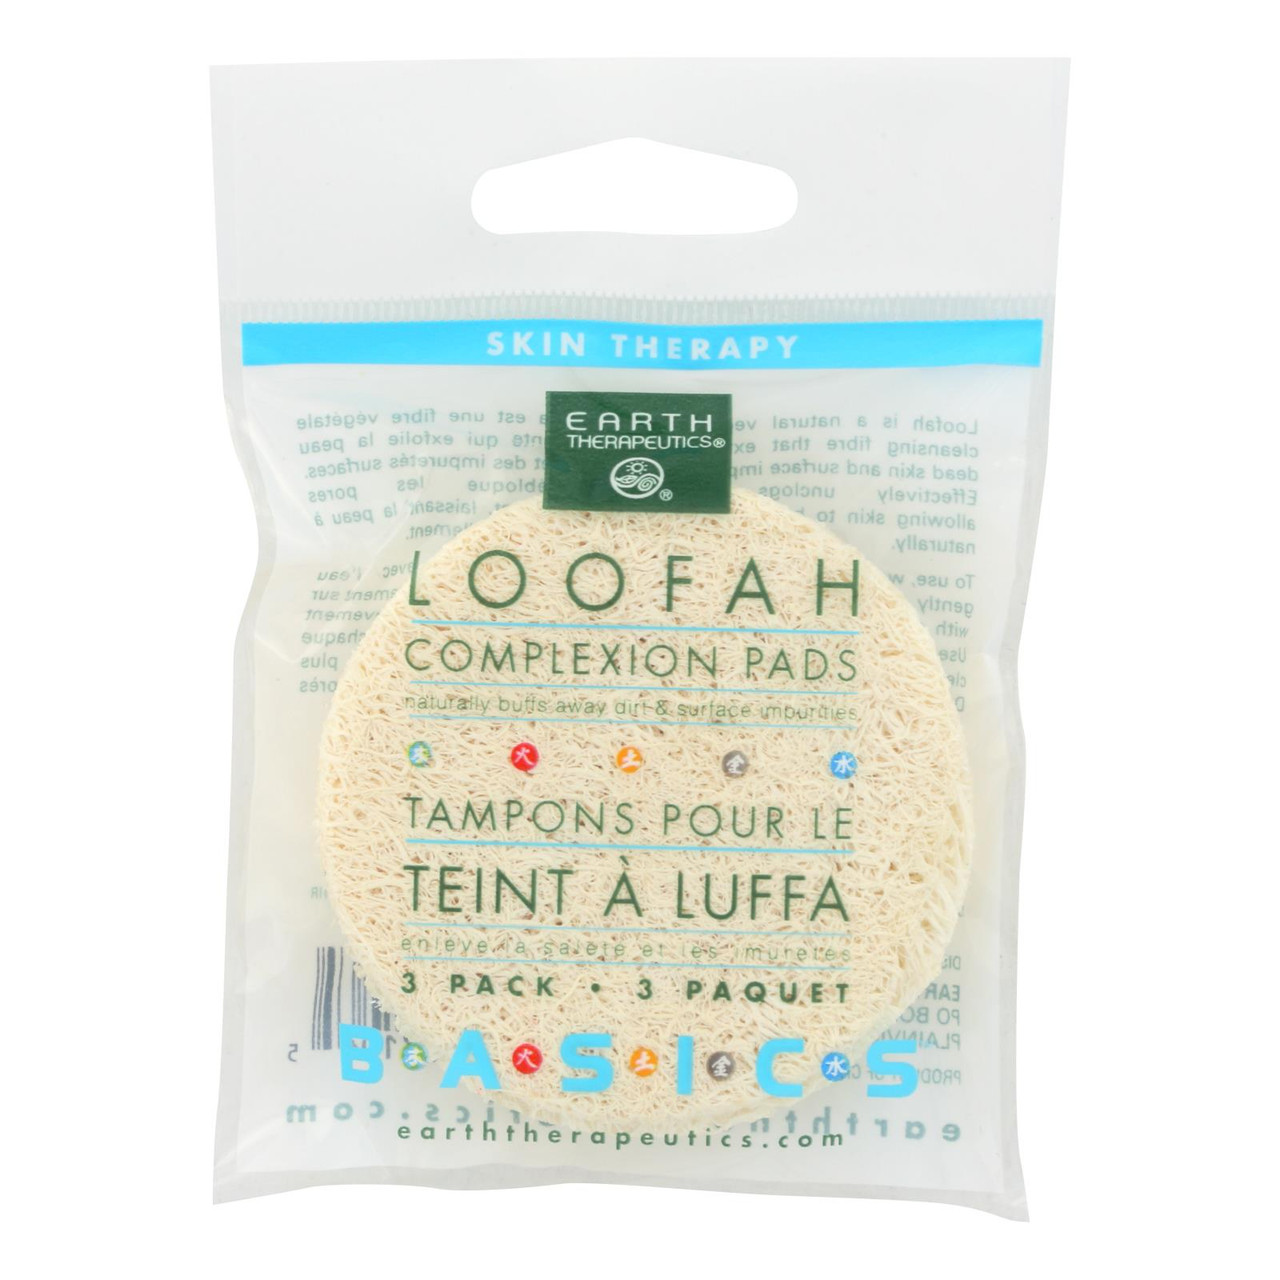 Image of Earth Therapeutics Loofah Complexion Pads - 3 Pads - Case of 12